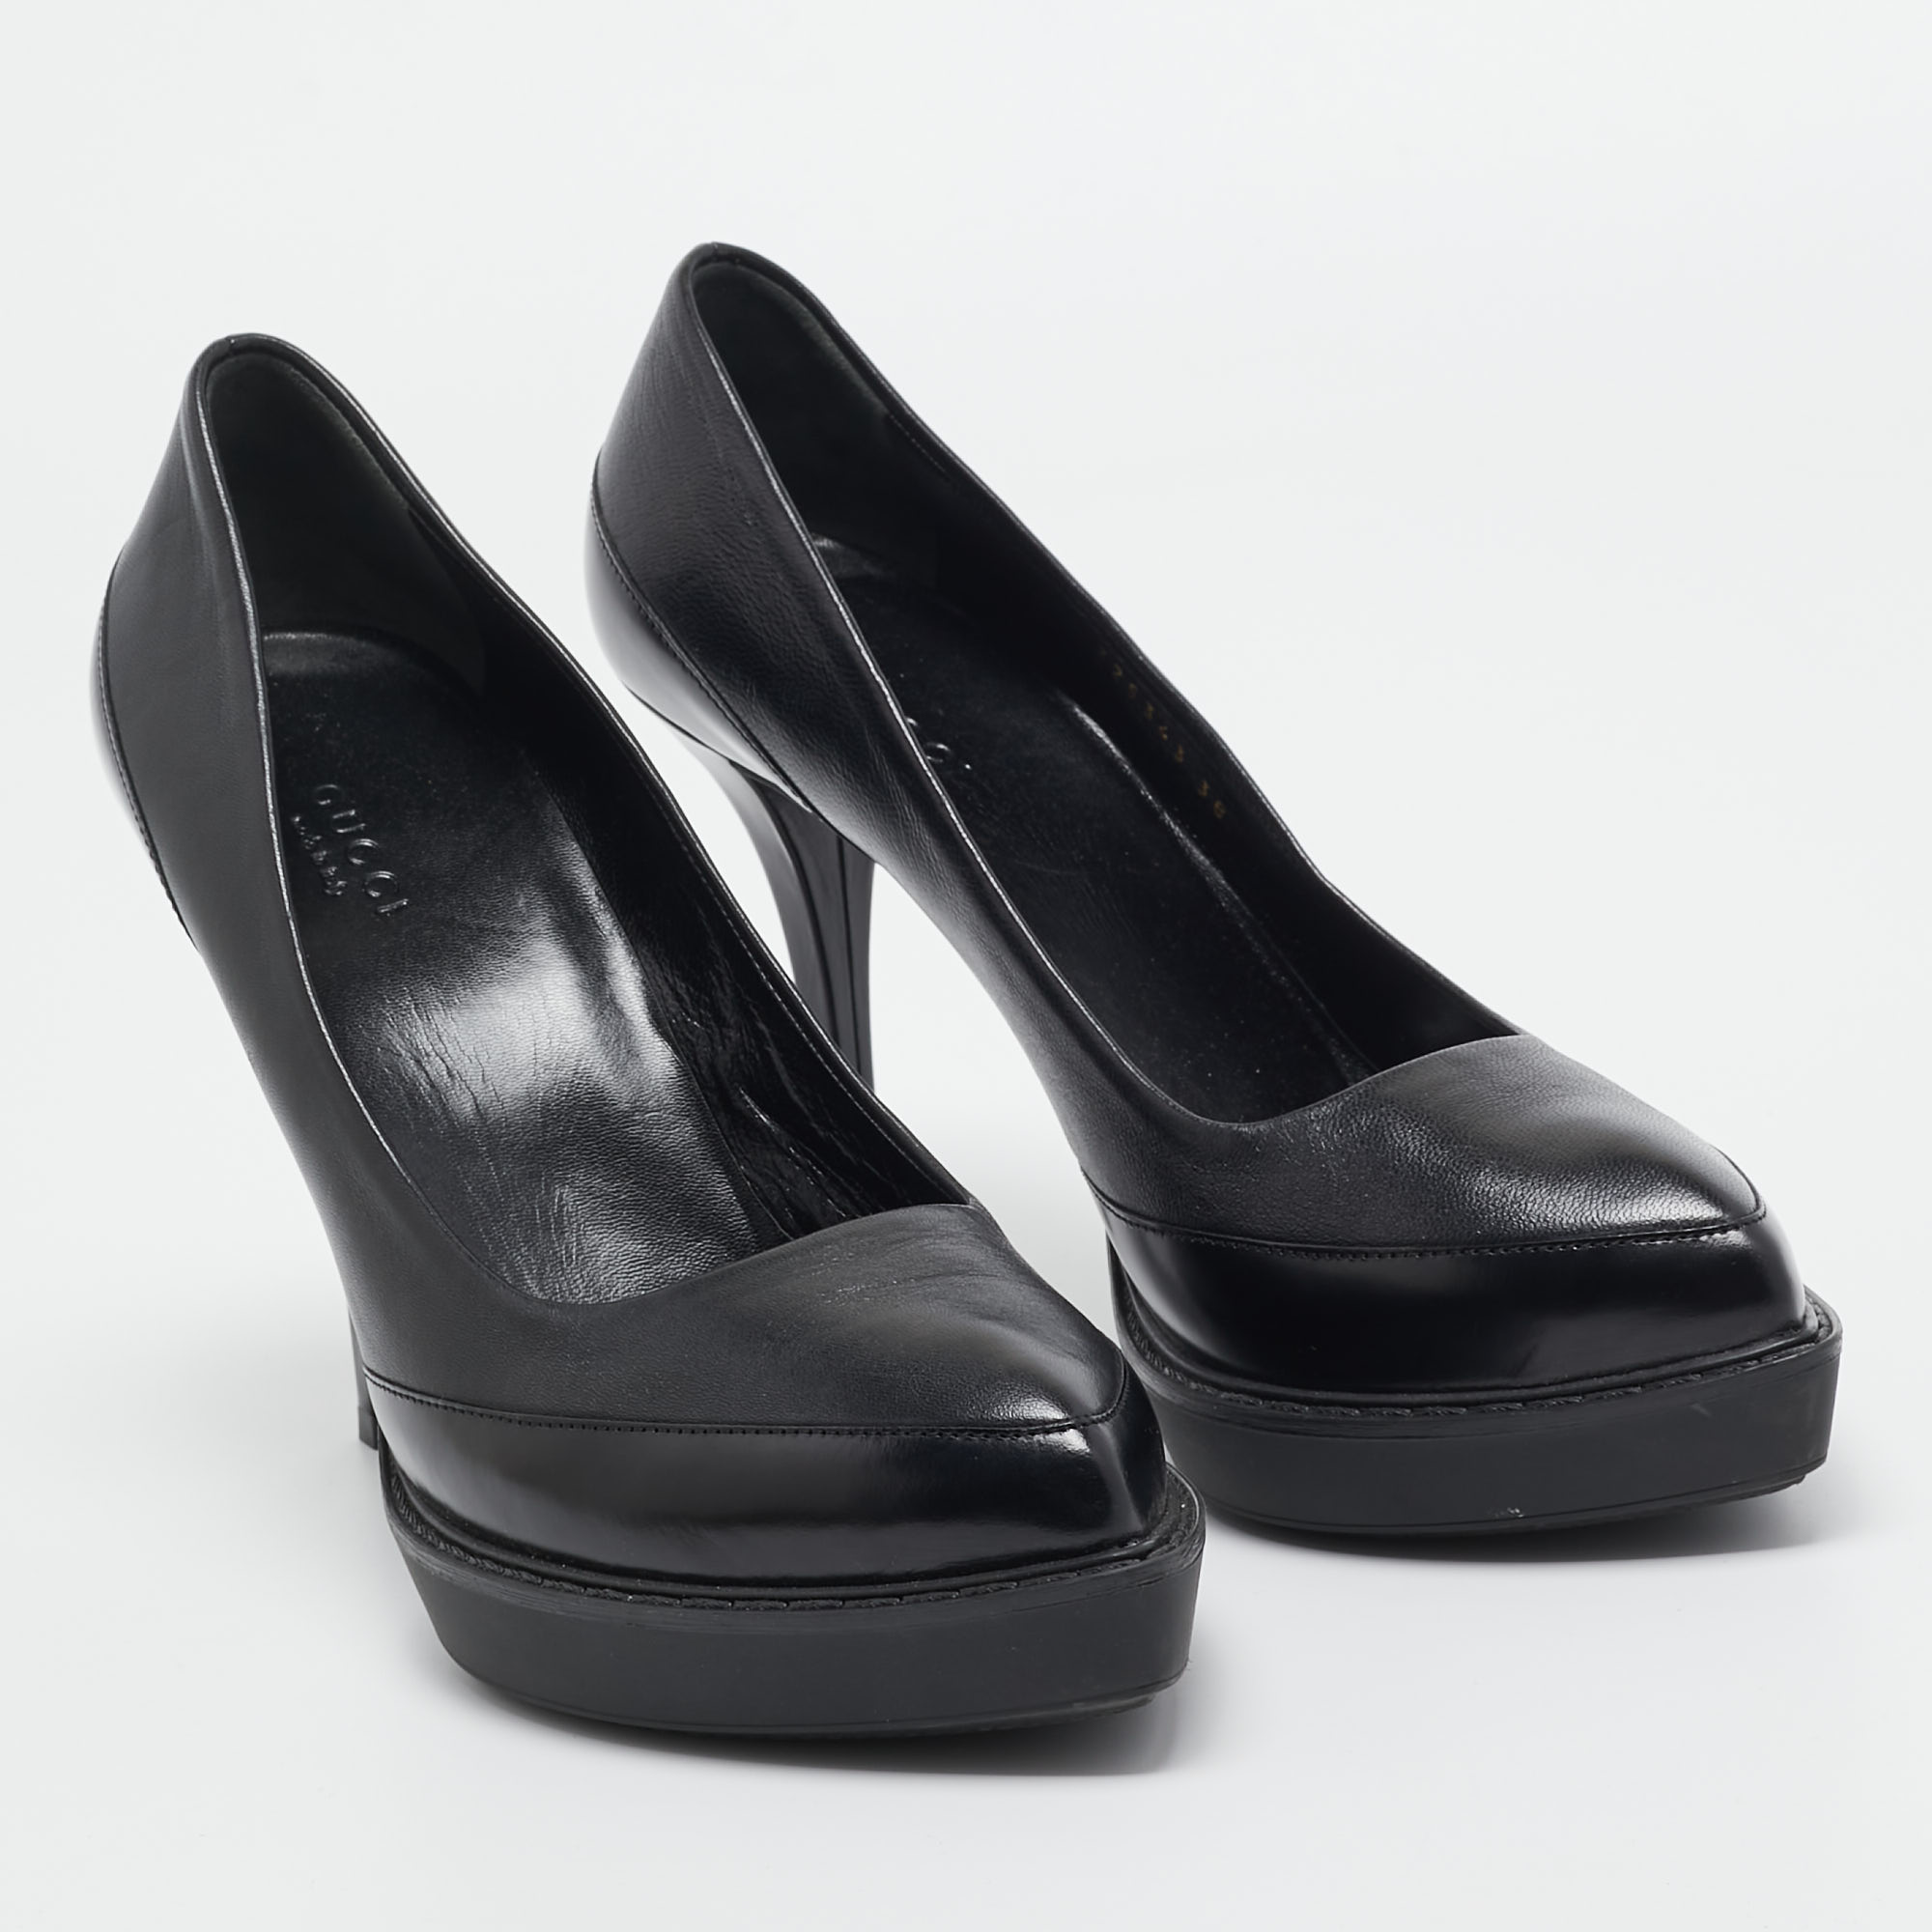 Gucci Black Leather Pointed Toe Pumps Size 38